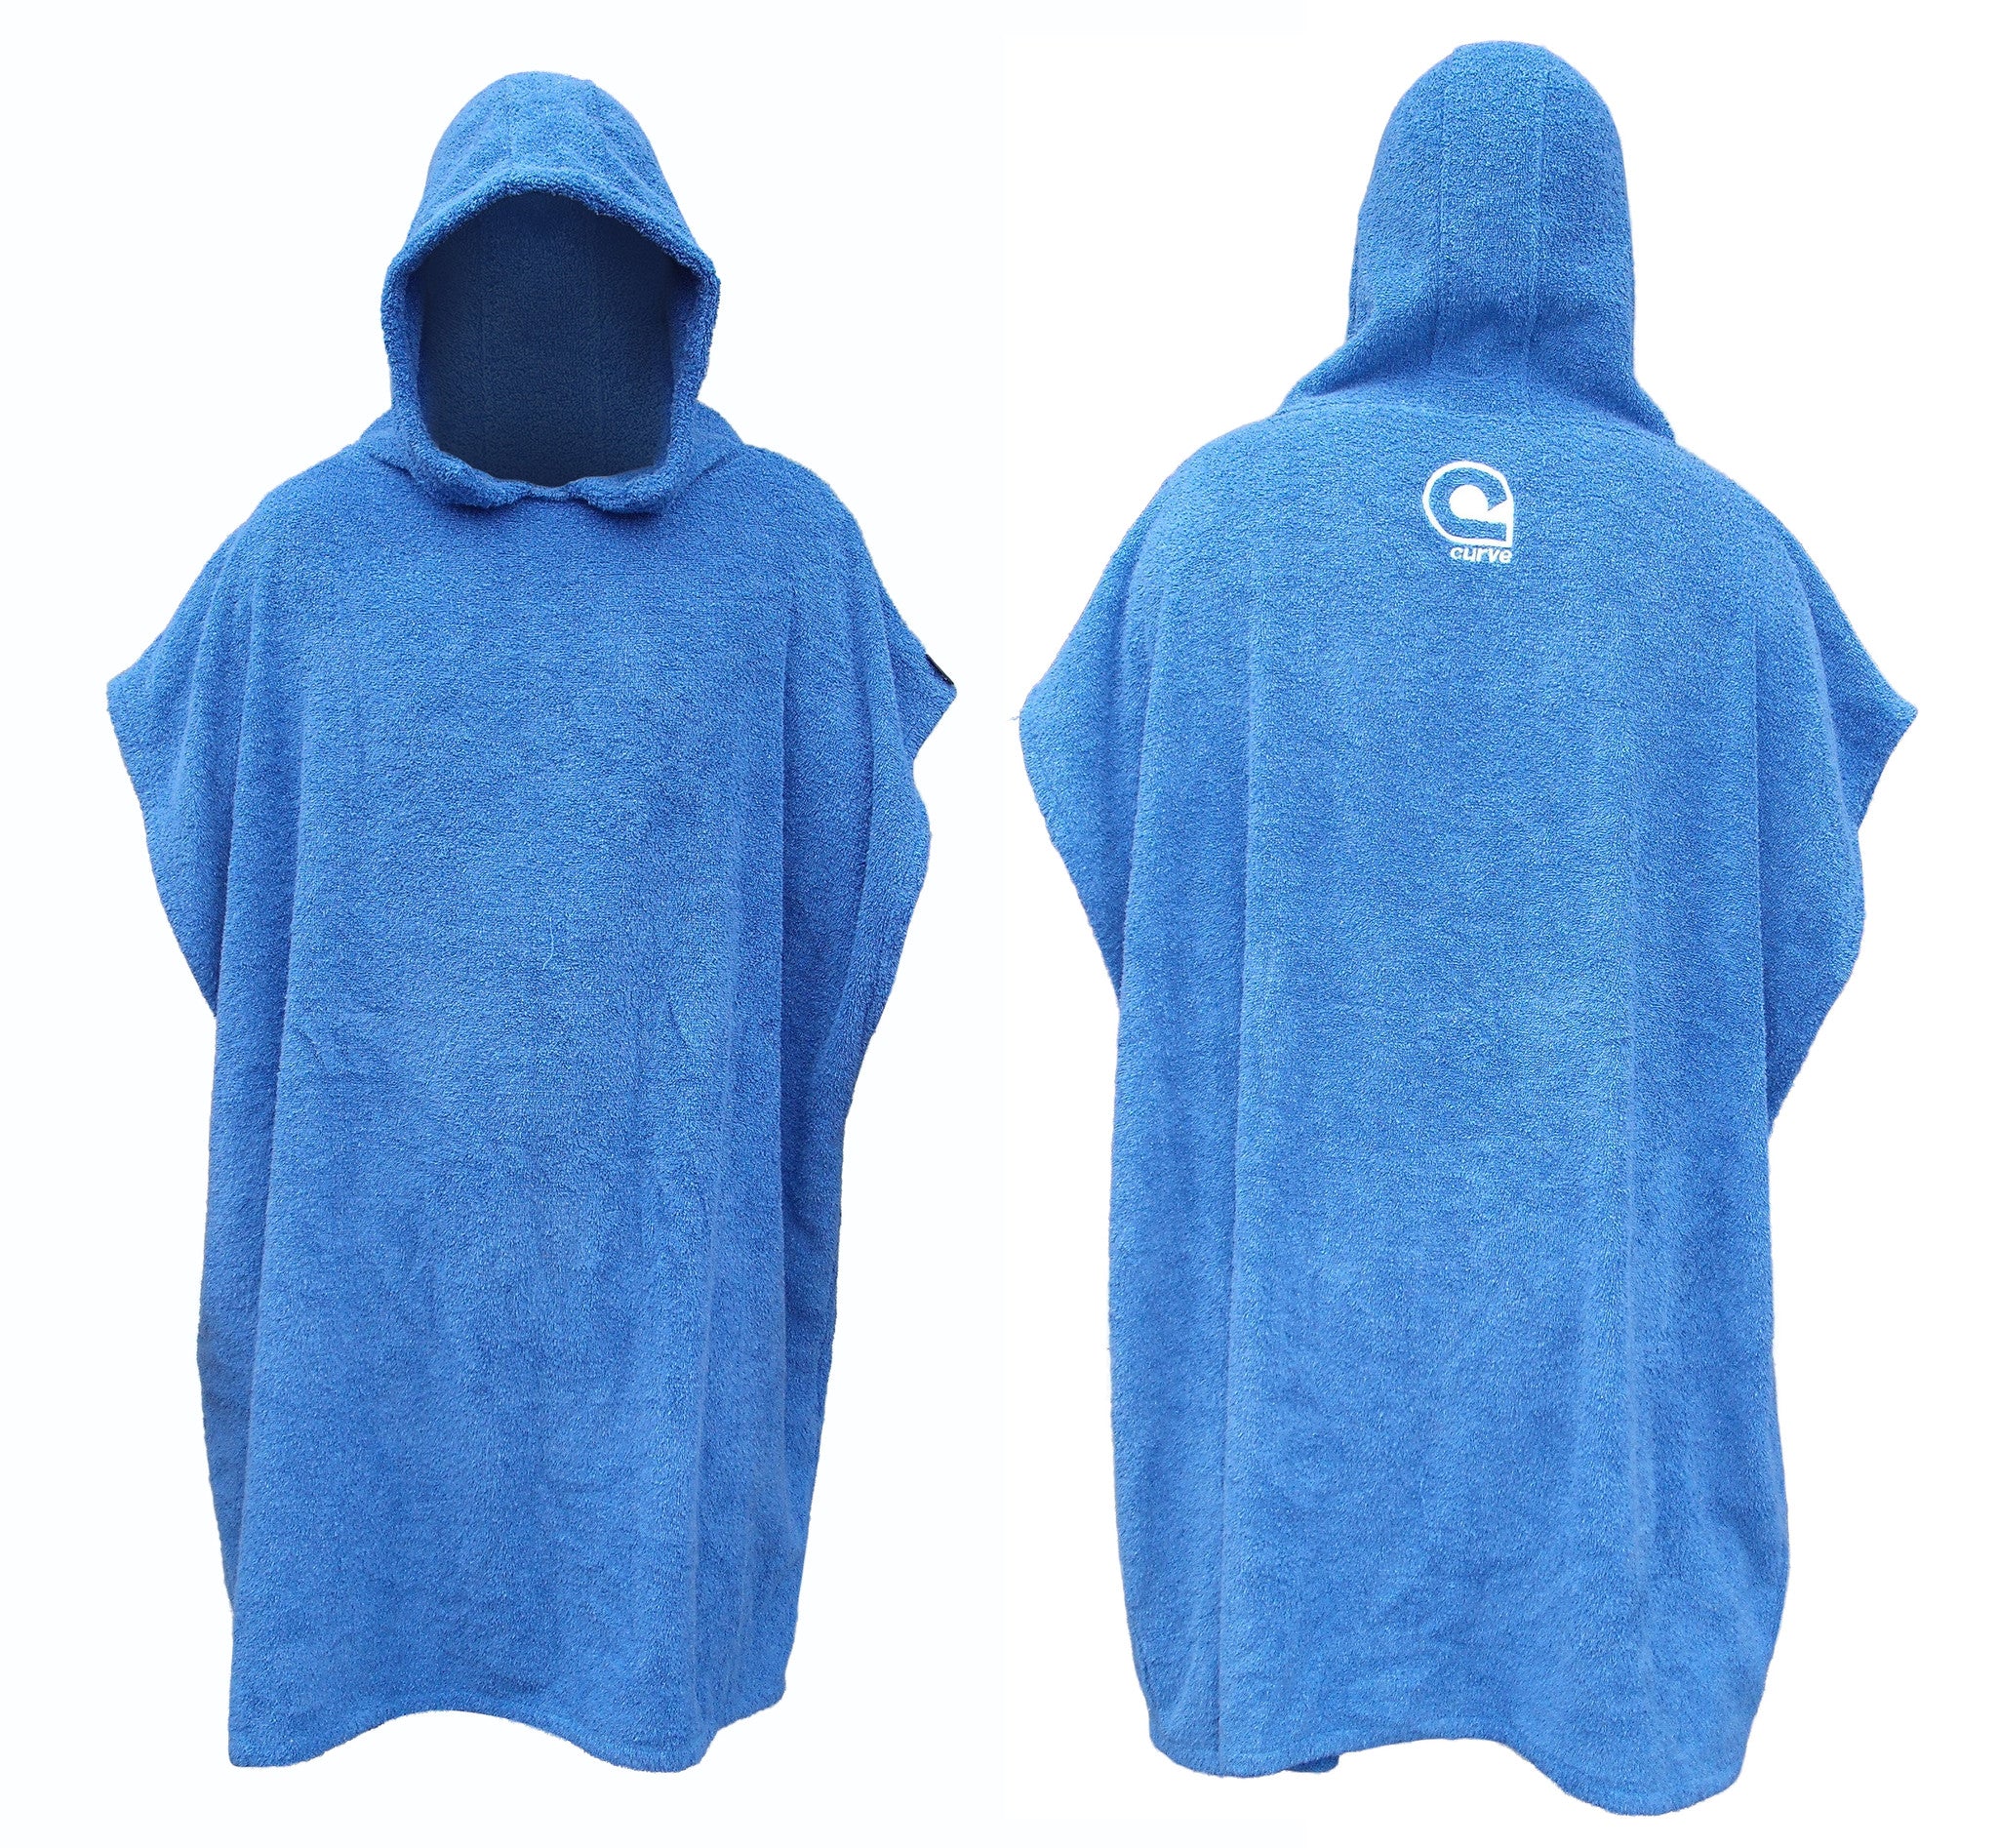 Surf Poncho Towel Hooded Surf Towel Poncho Cotton Surf Changing Towel